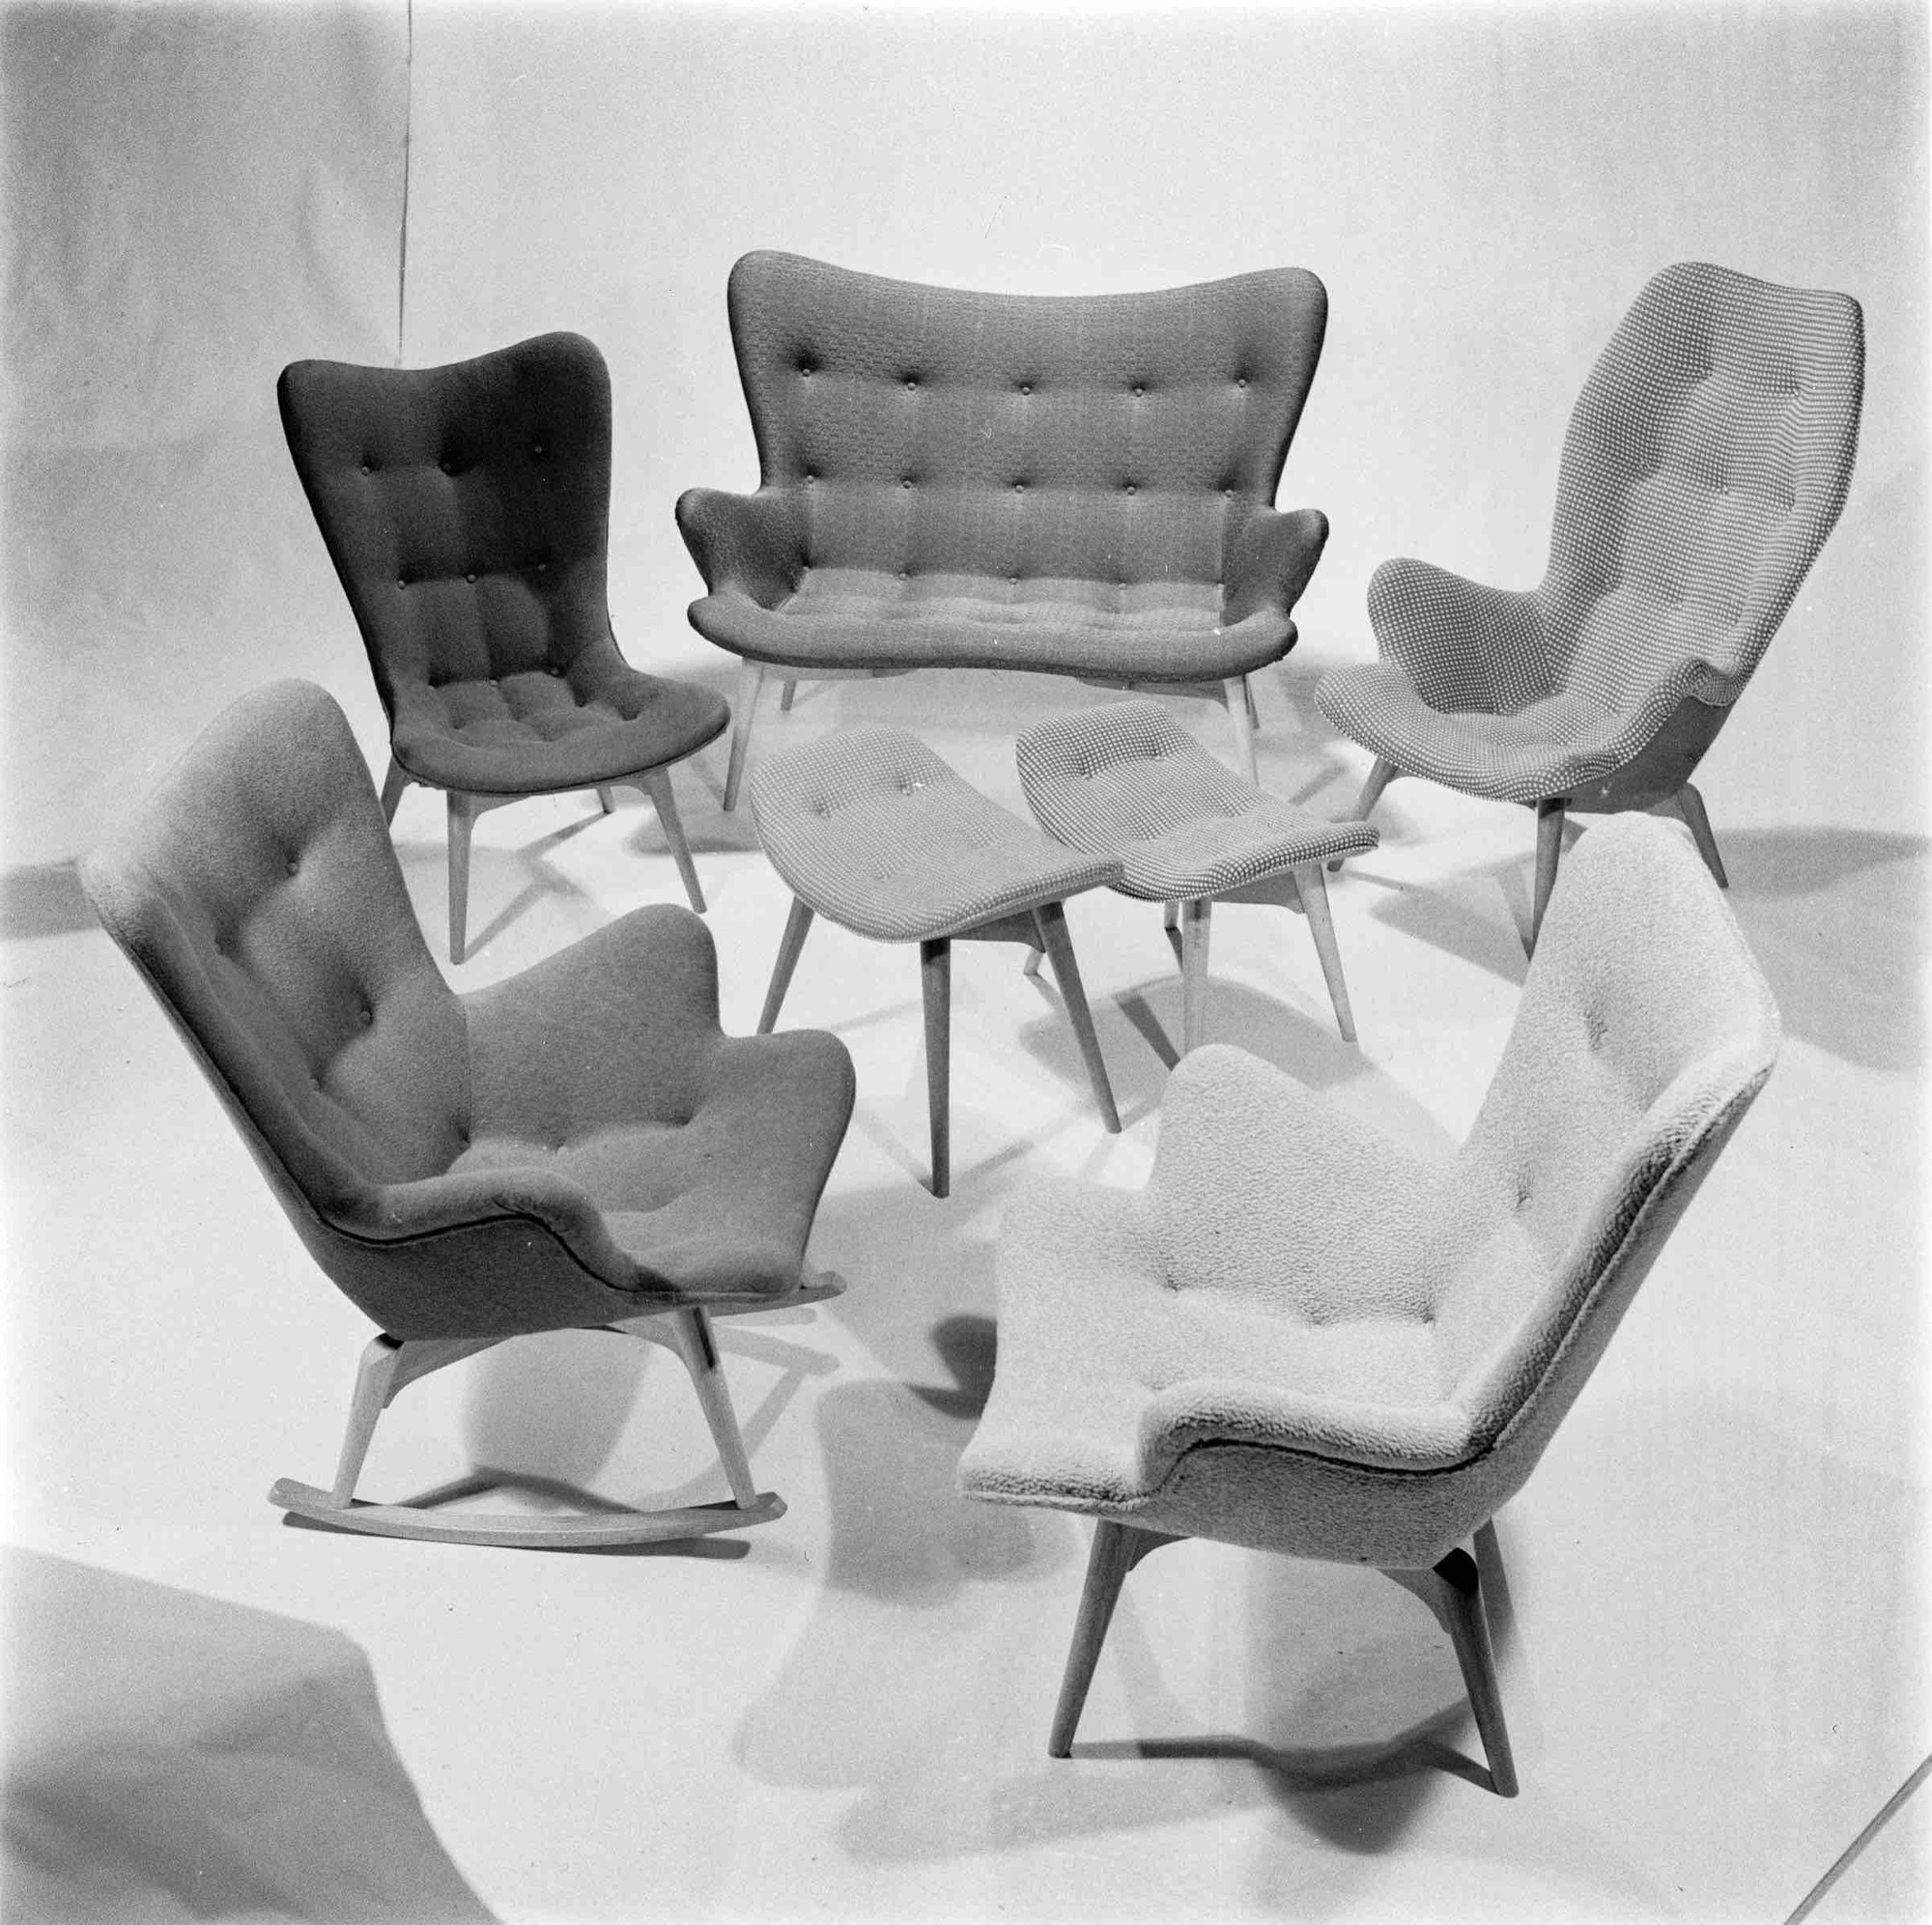 Family of Contour Chairs (clockwise from top): RS161, W180, R160, Rocking Chair, R152, DS200, and S200 Stools 1952. Featherston Archive, National Gallery of Victoria.